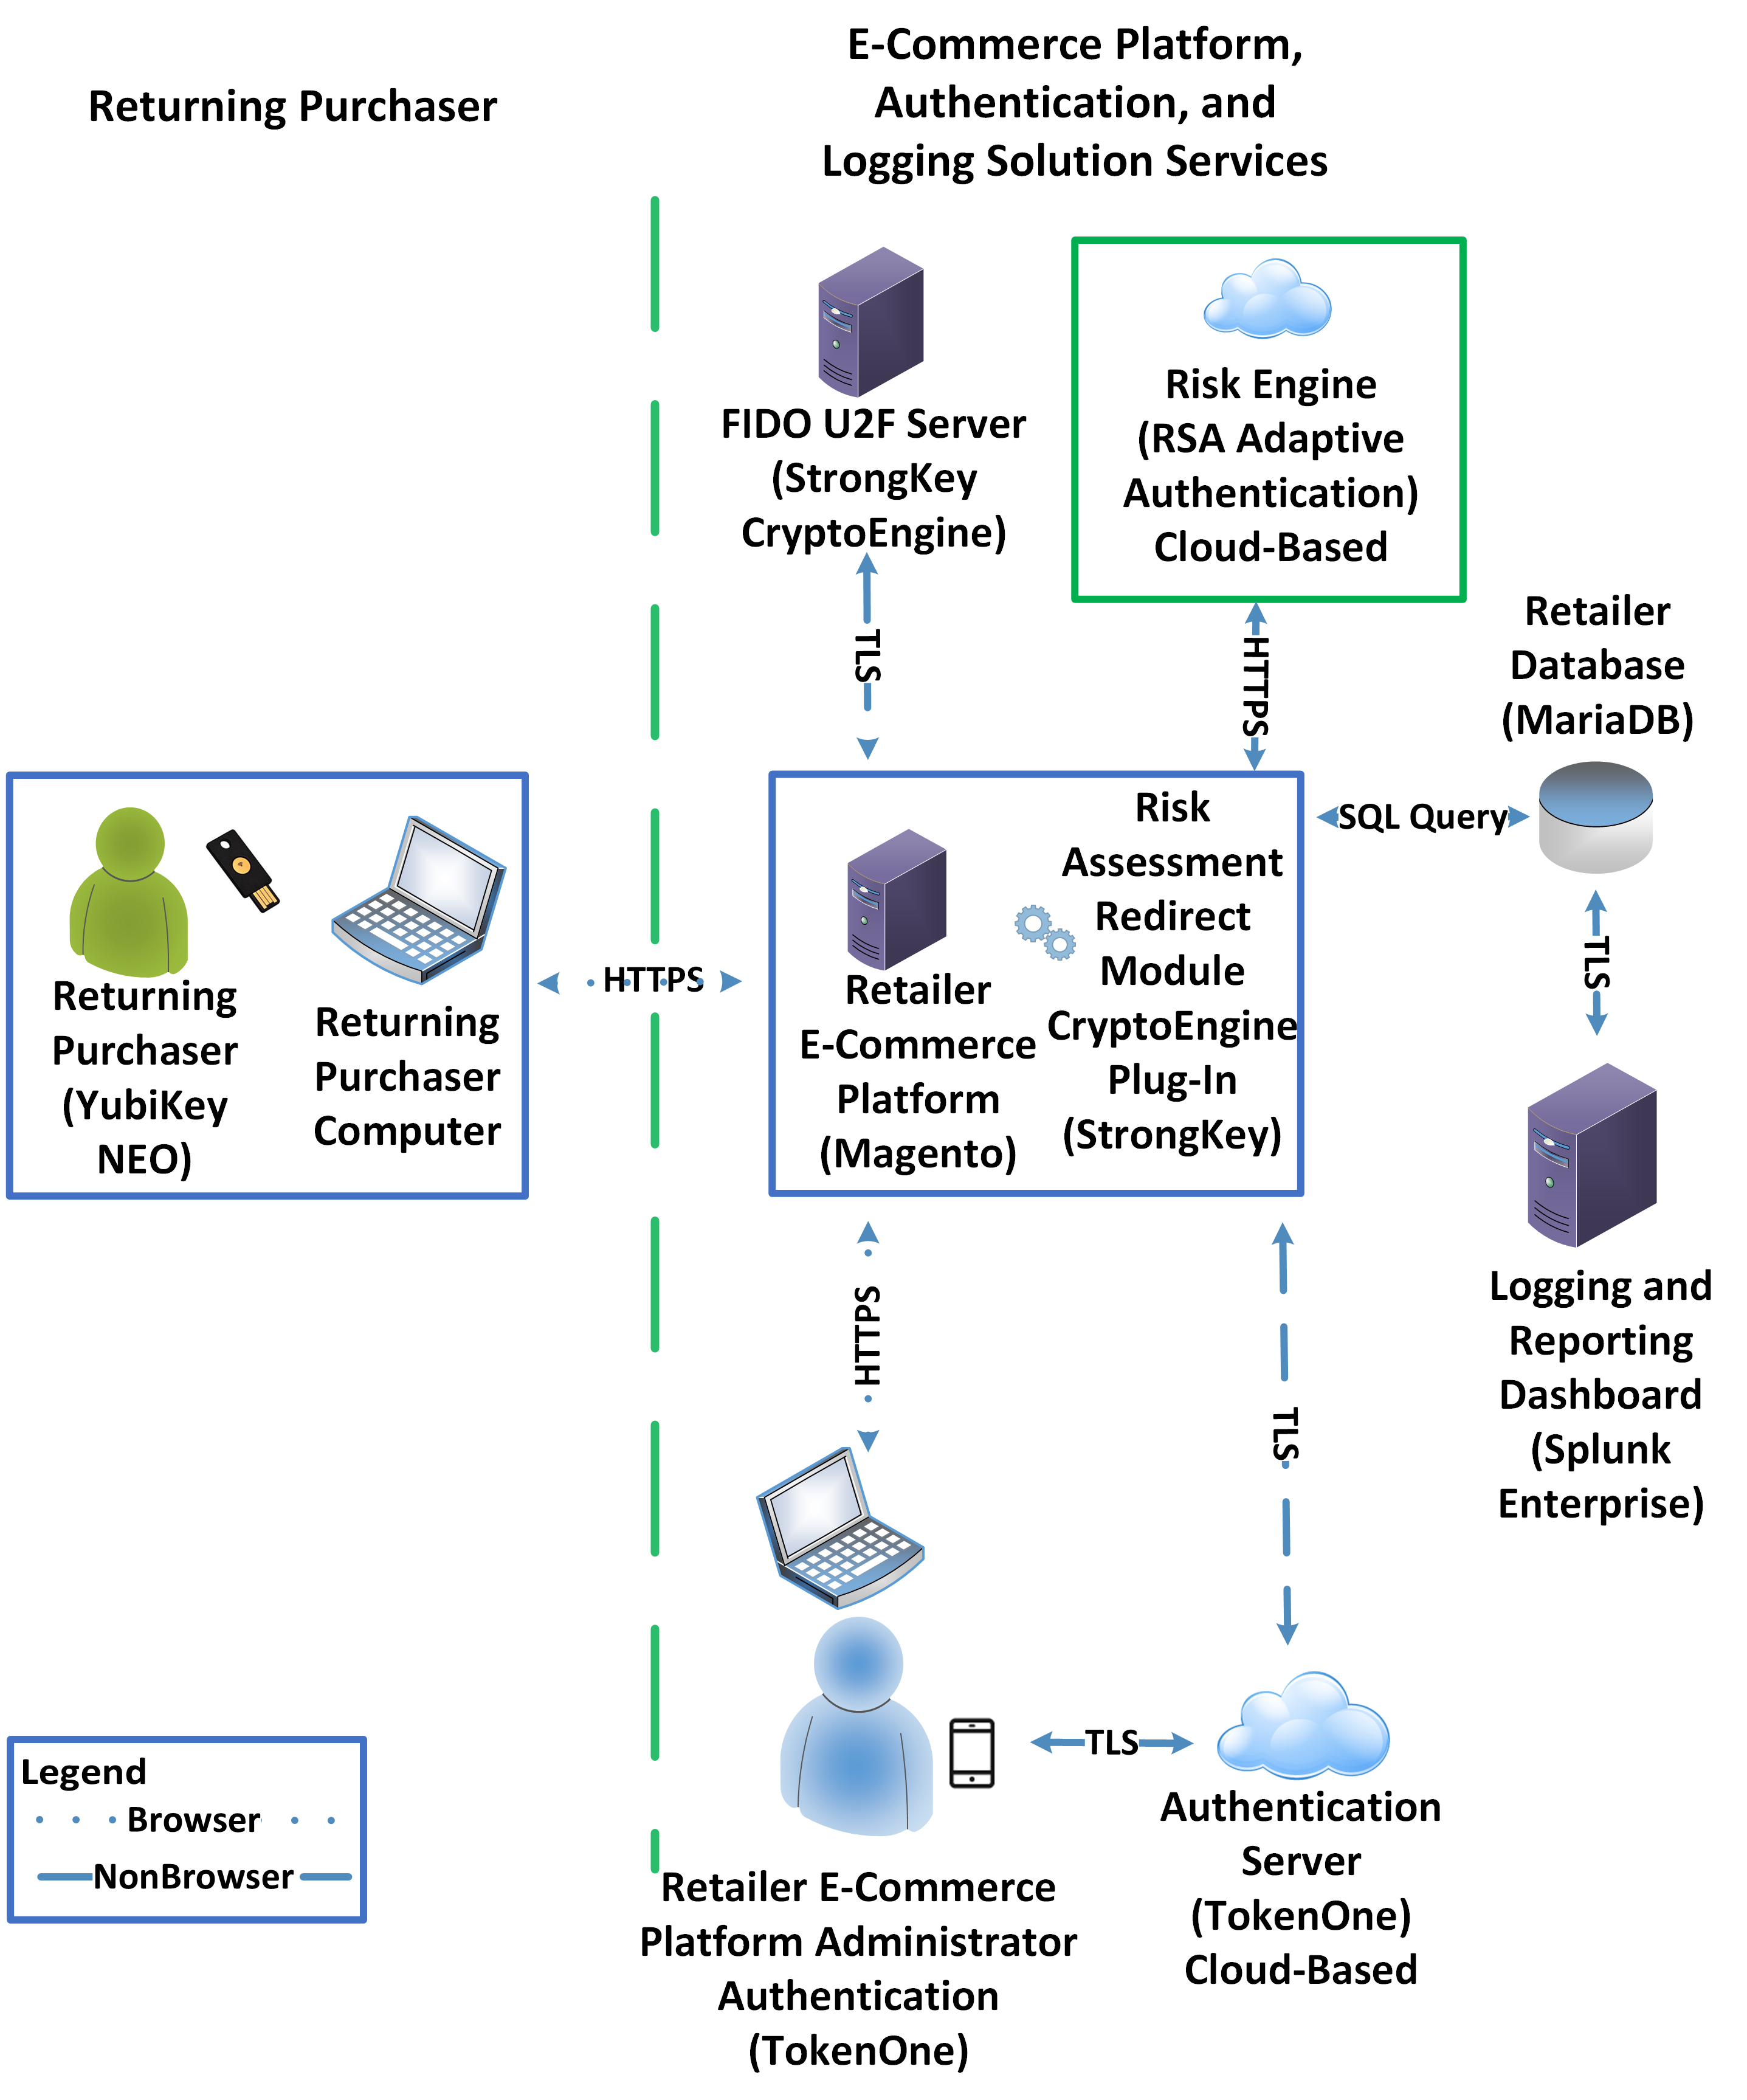 The High-Level Risk Engine Reference Architecture image demonstrates the returning purchaser's and system administrator's interaction with system components and their use of multifactor authentication.